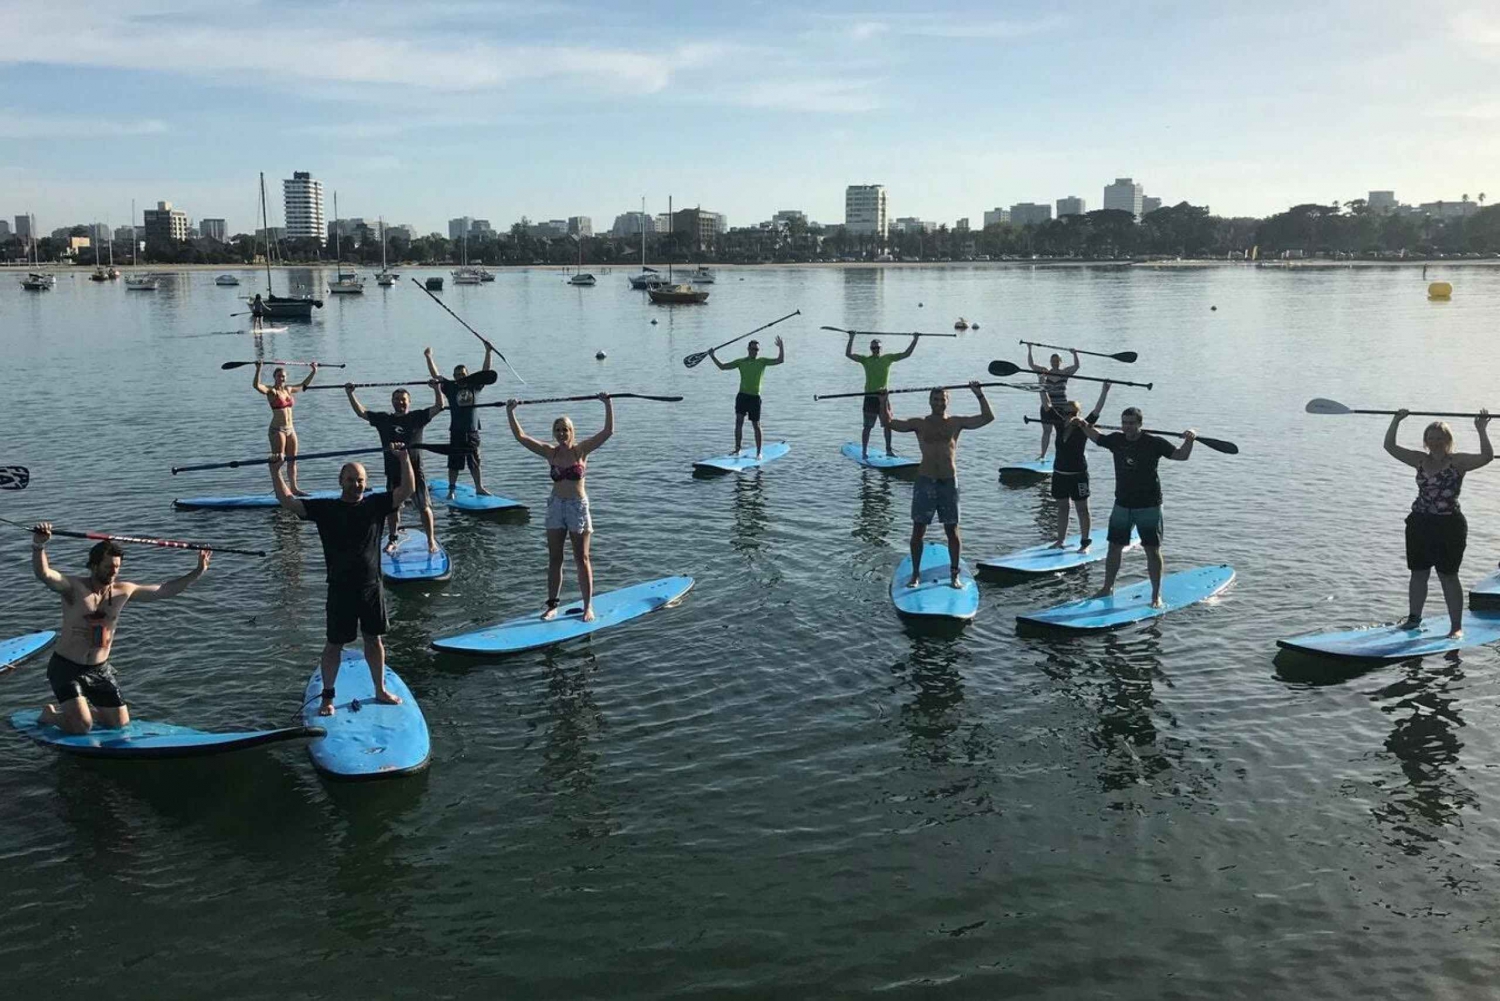 St Kilda: Group Lesson for Stand-Up Paddleboarding